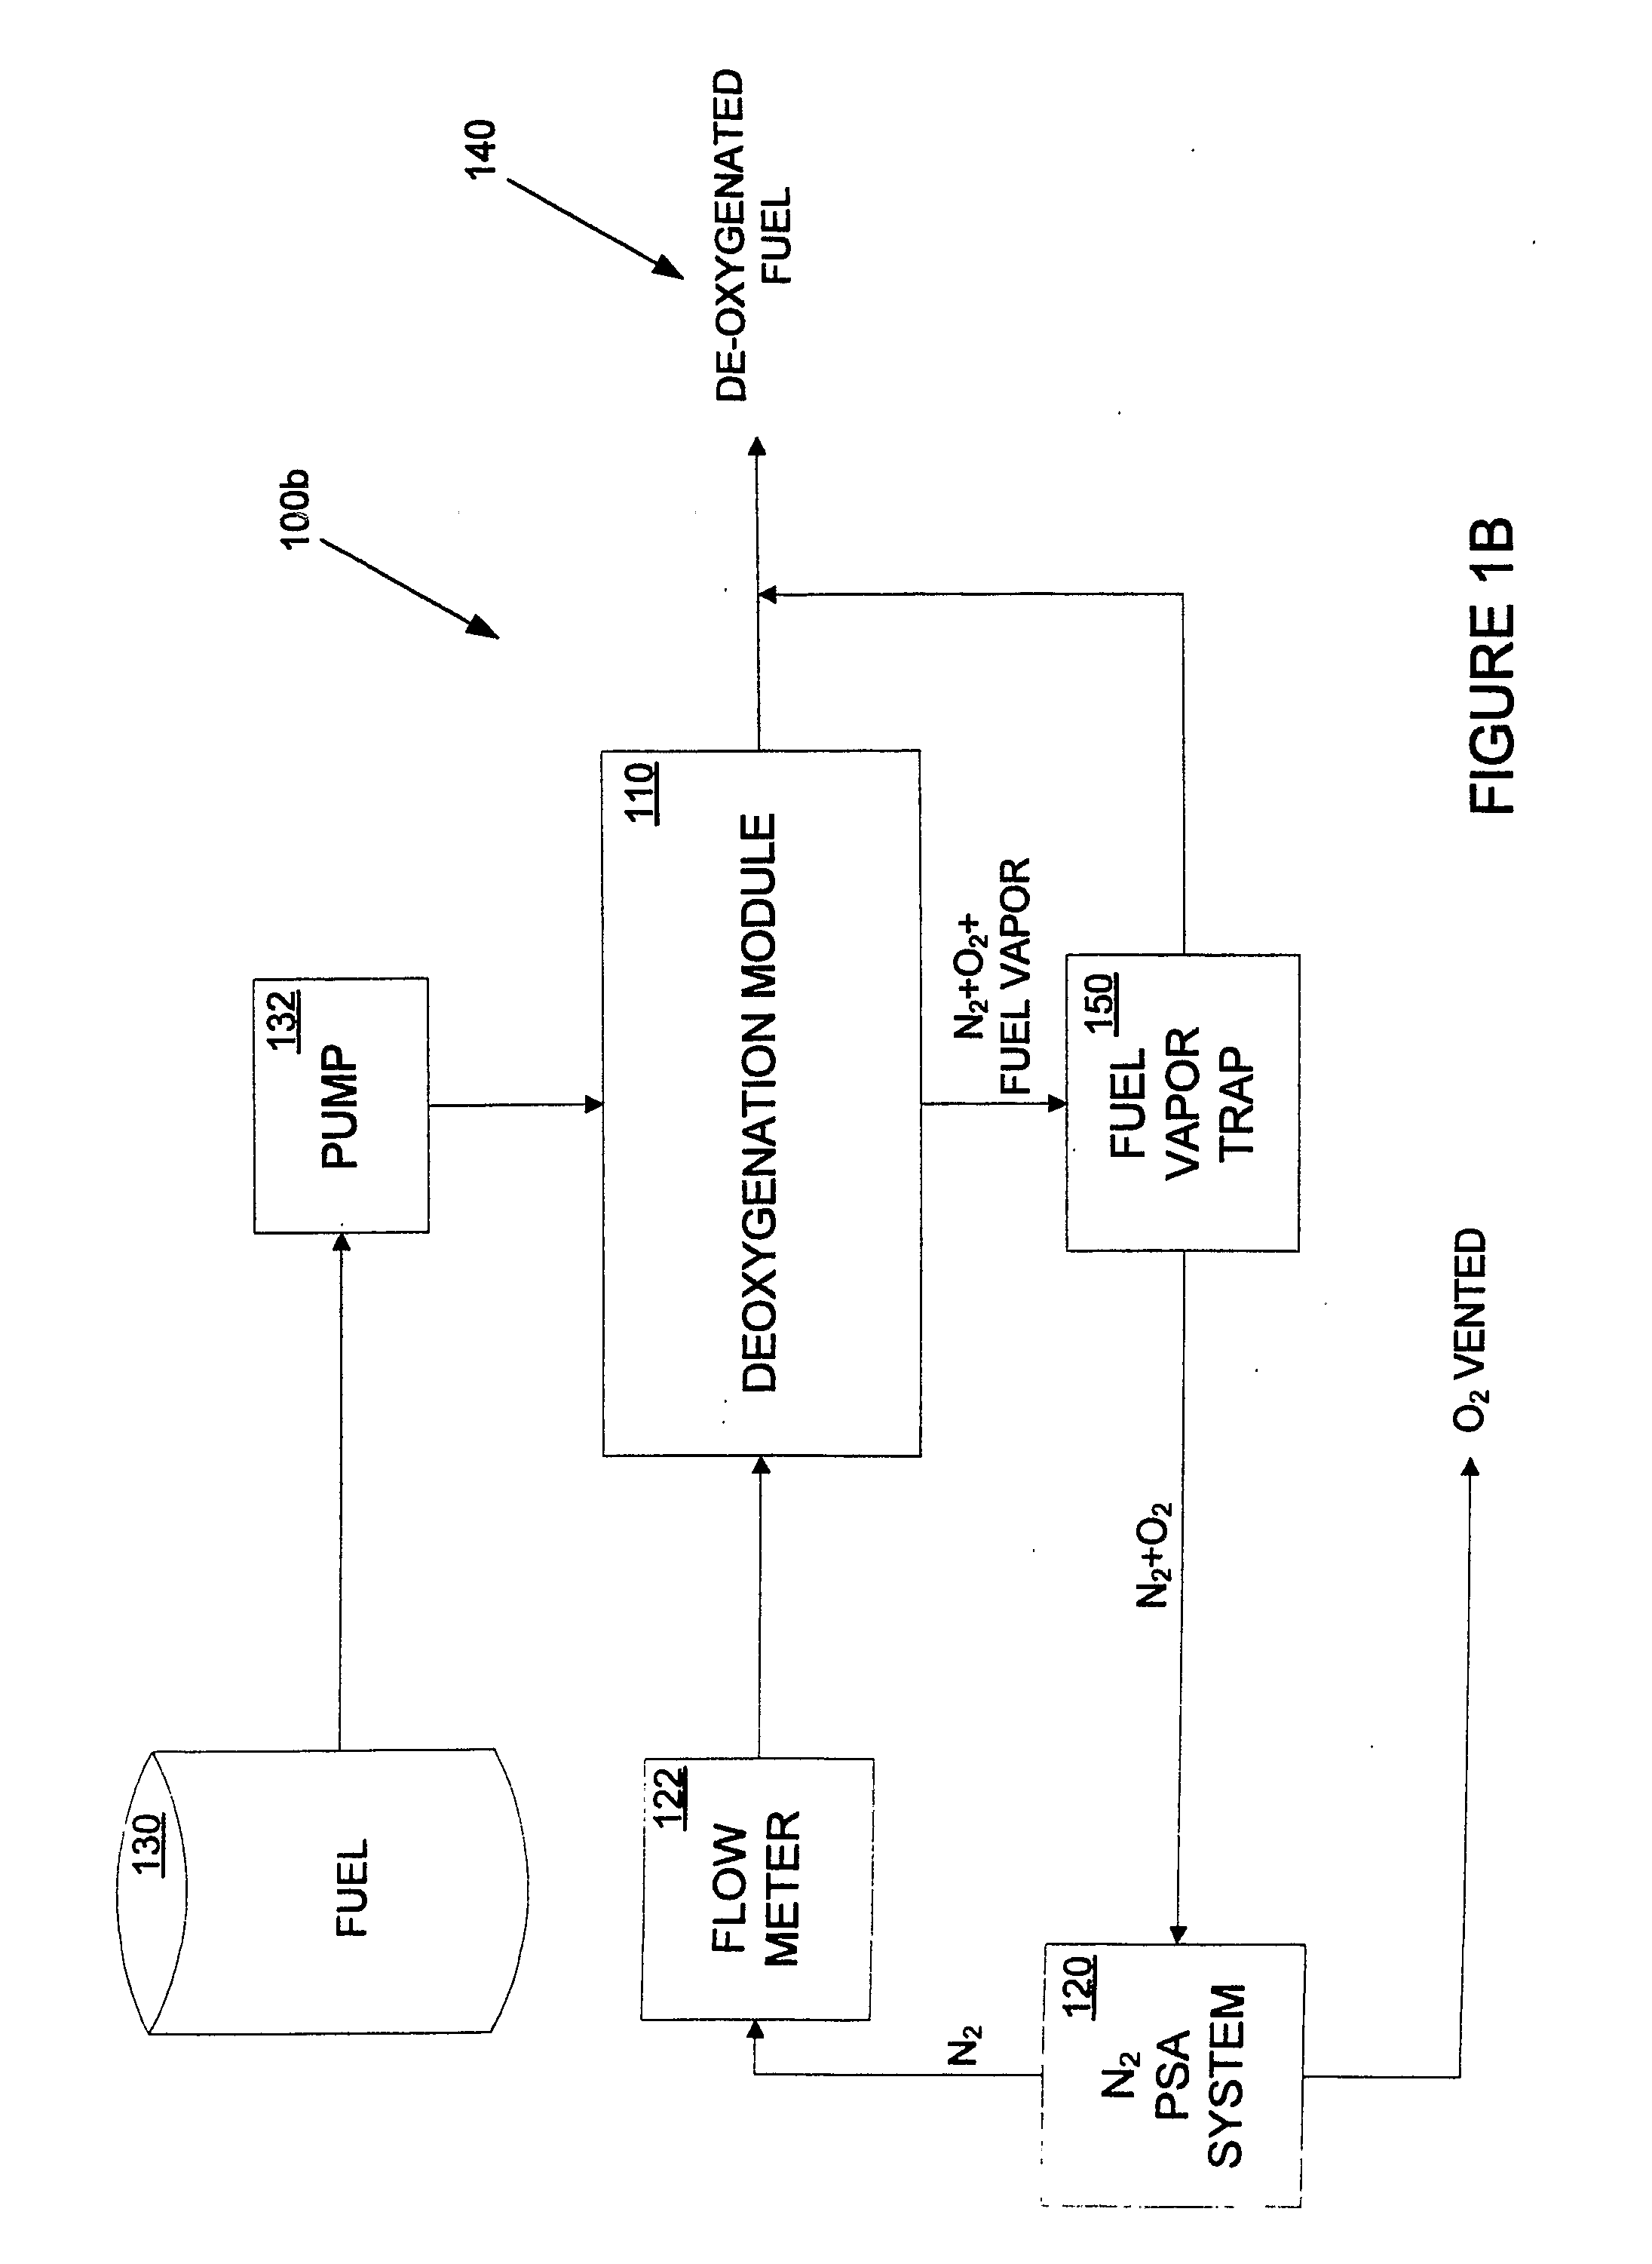 Contacting Systems and Methods and Uses Thereof